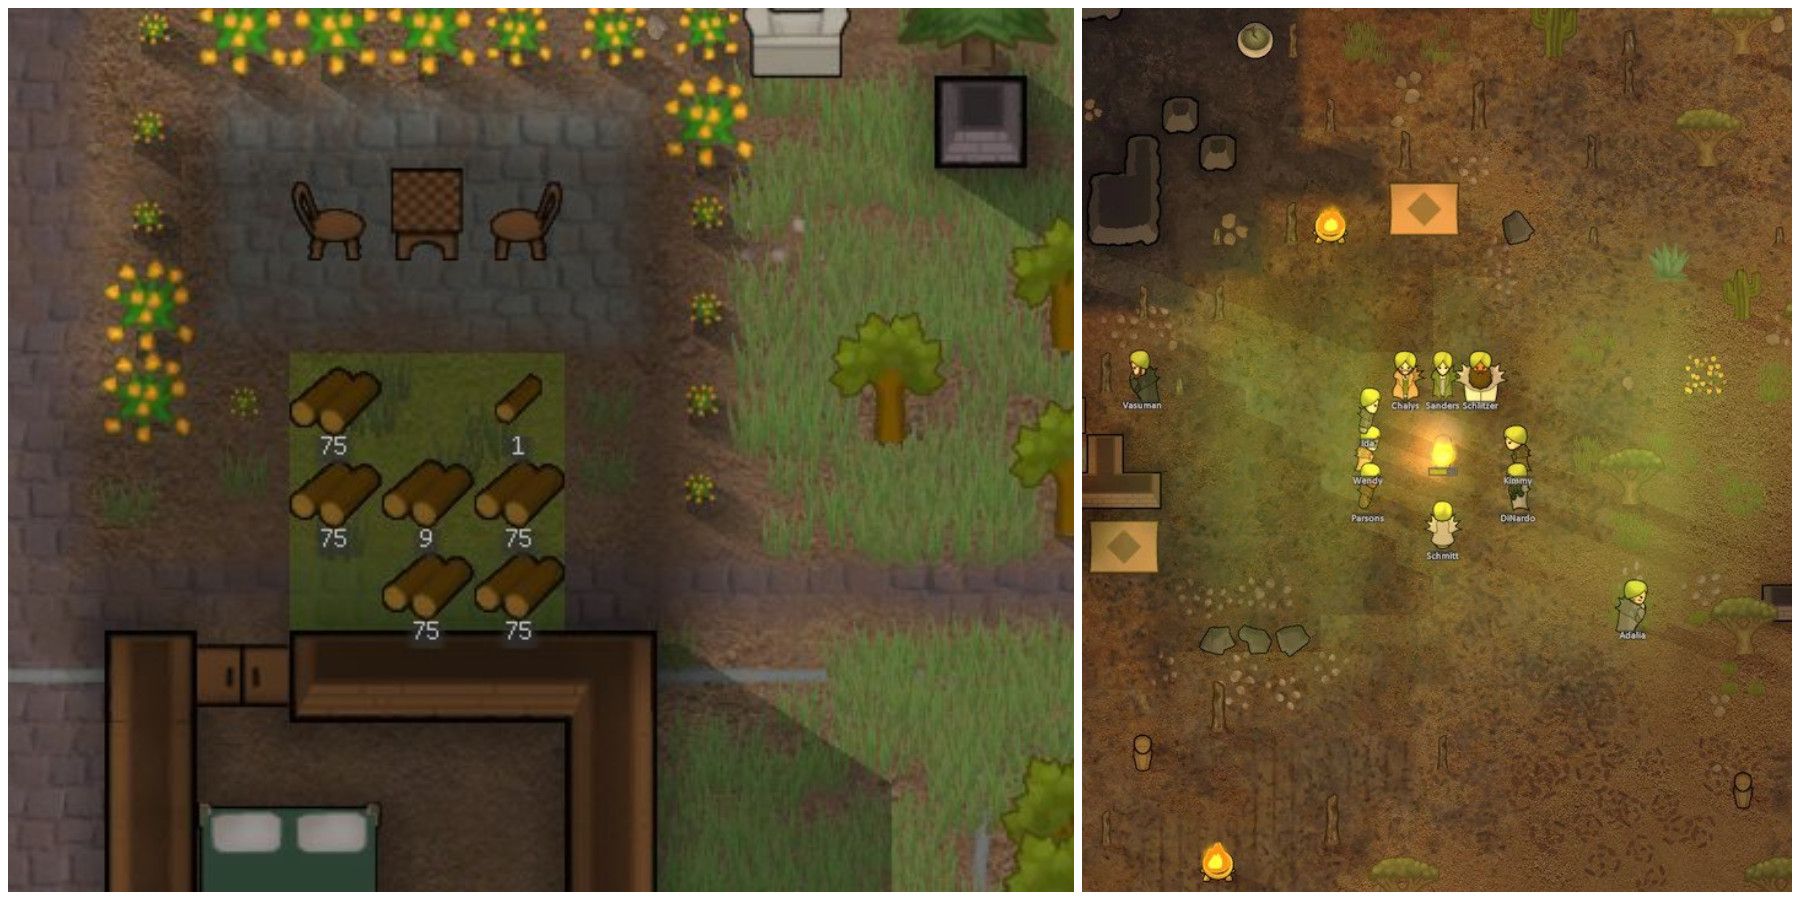 Wood needed to craft the wooden Club in RimWorld.